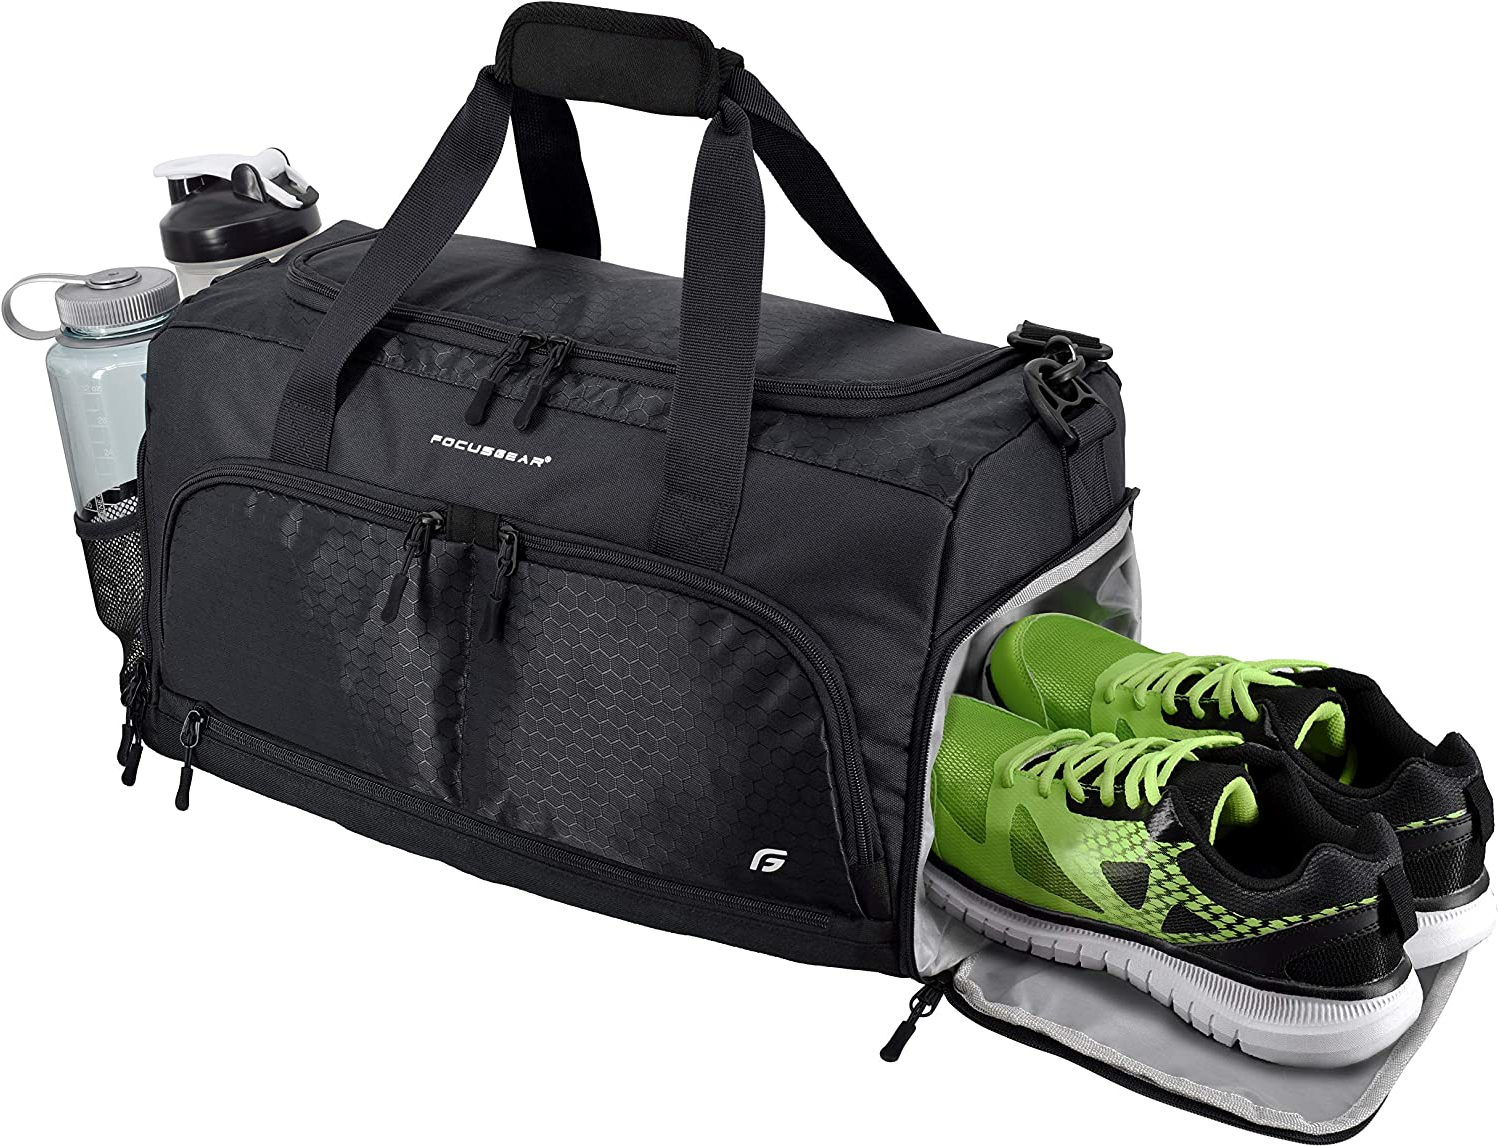 Ultimate Gym Bag 2.0: The Durable Crowdsource Designed Duffel Bag with